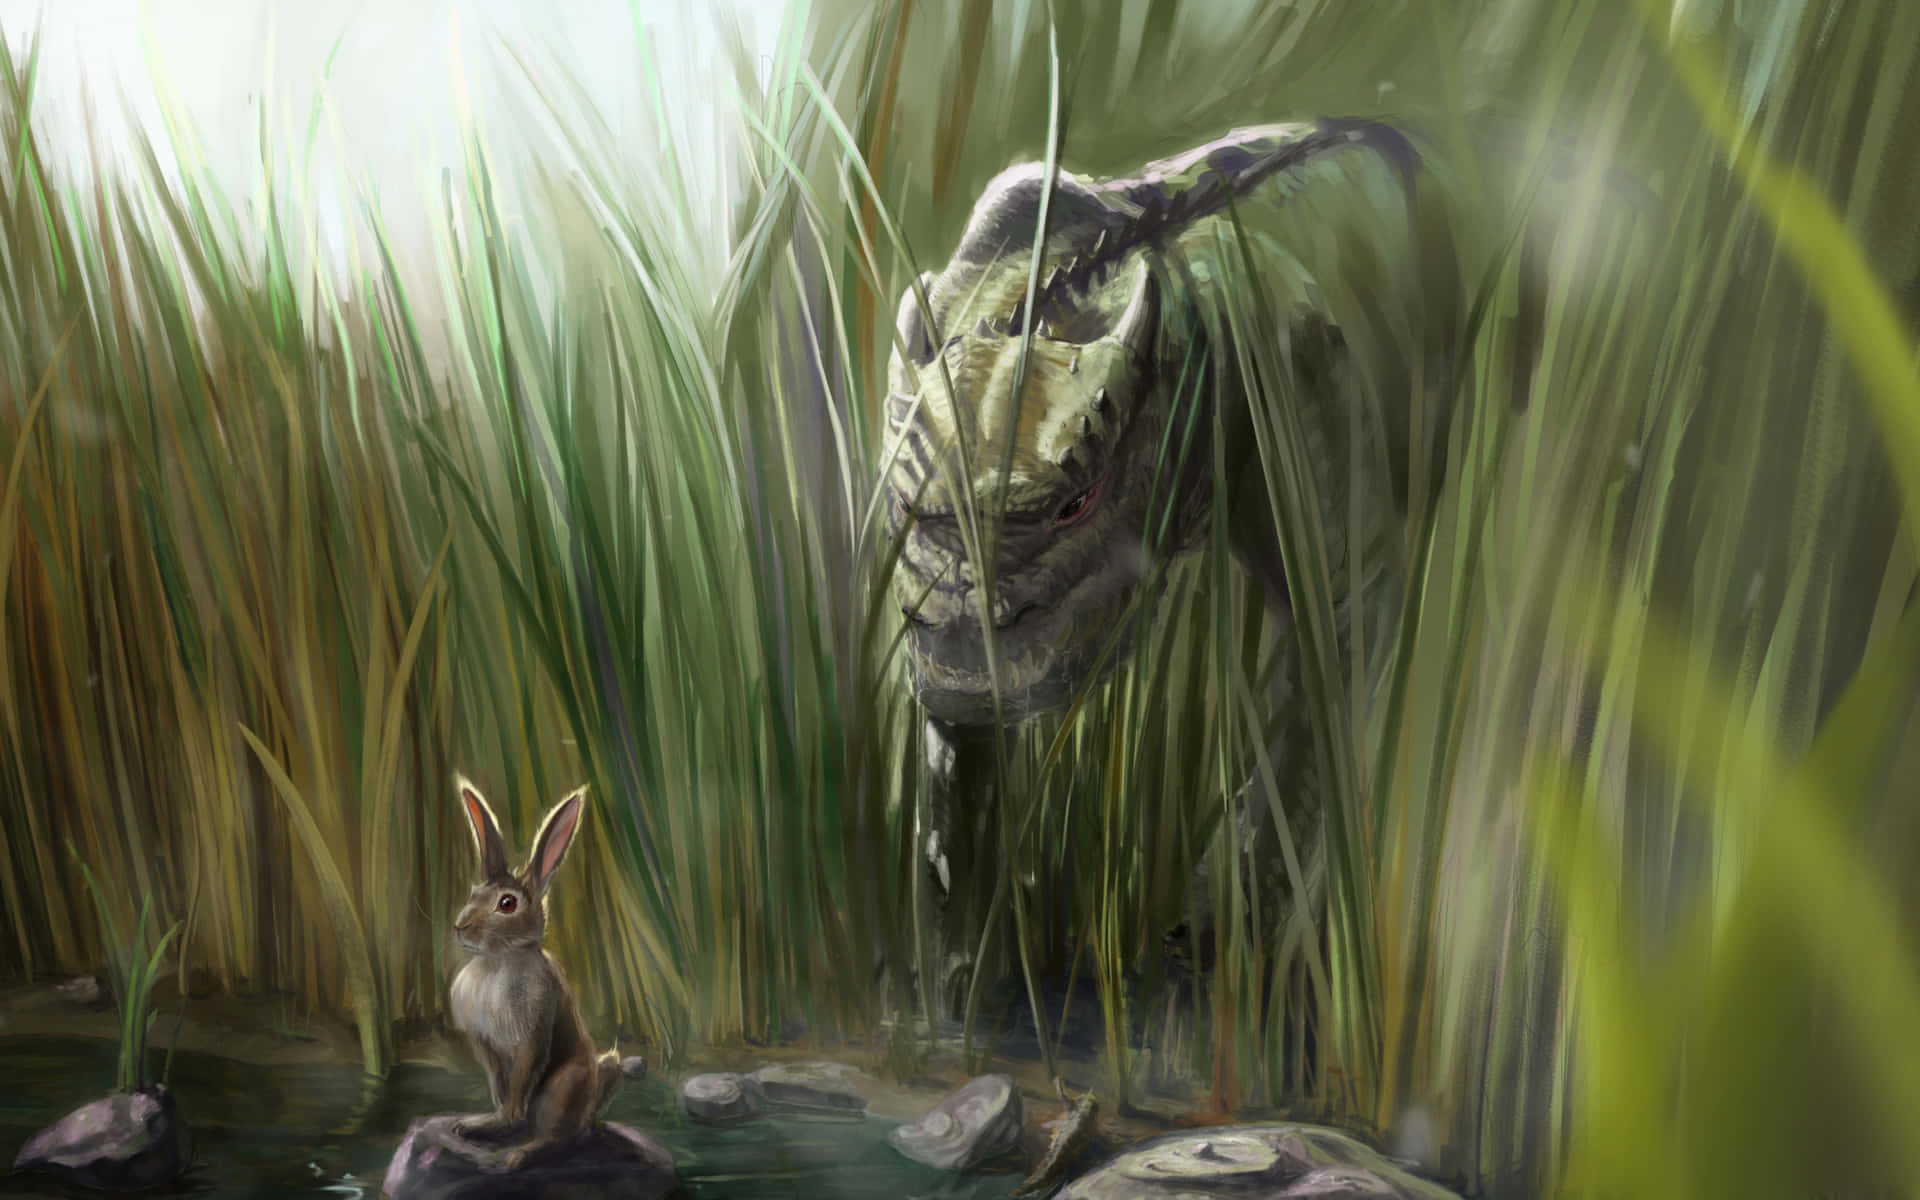 A Rabbit And A Dragon In The Grass